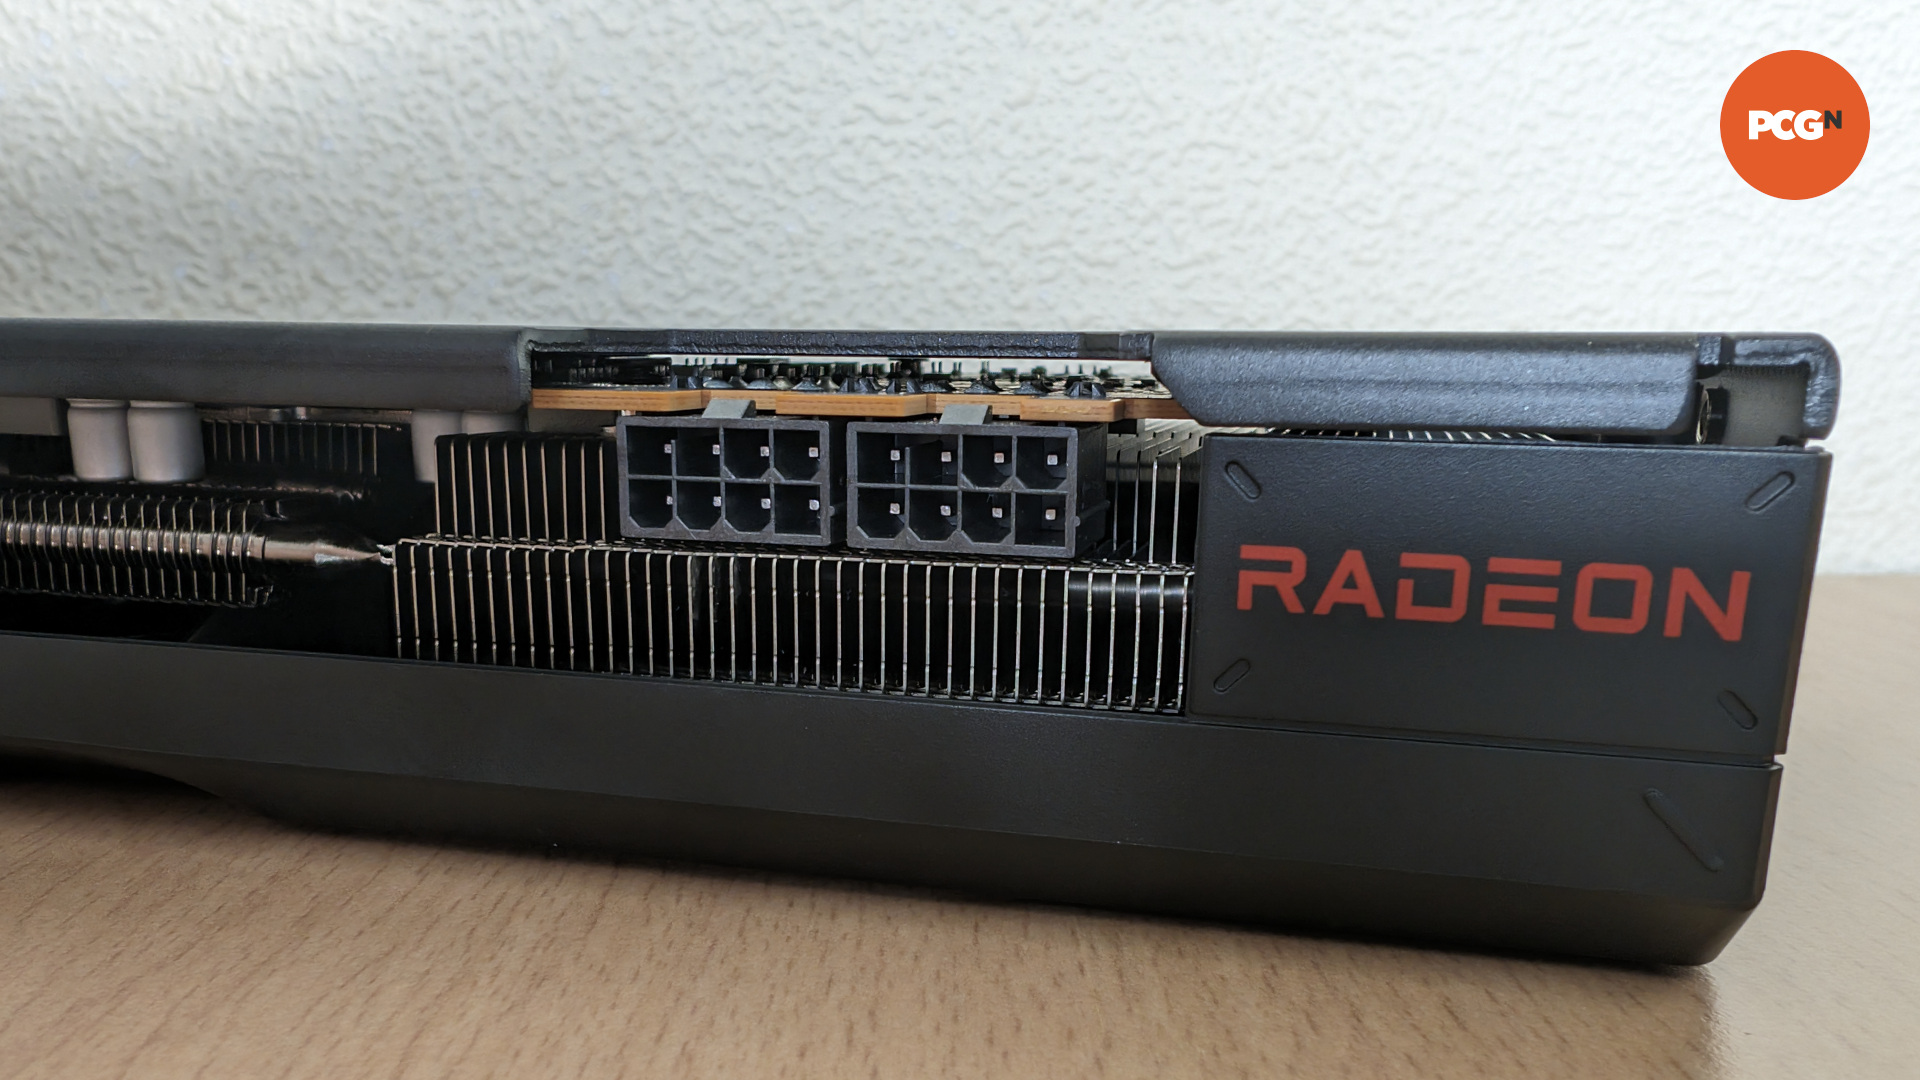 The eight-pin PCIe connector ports on the Radeon RX 7600 XT